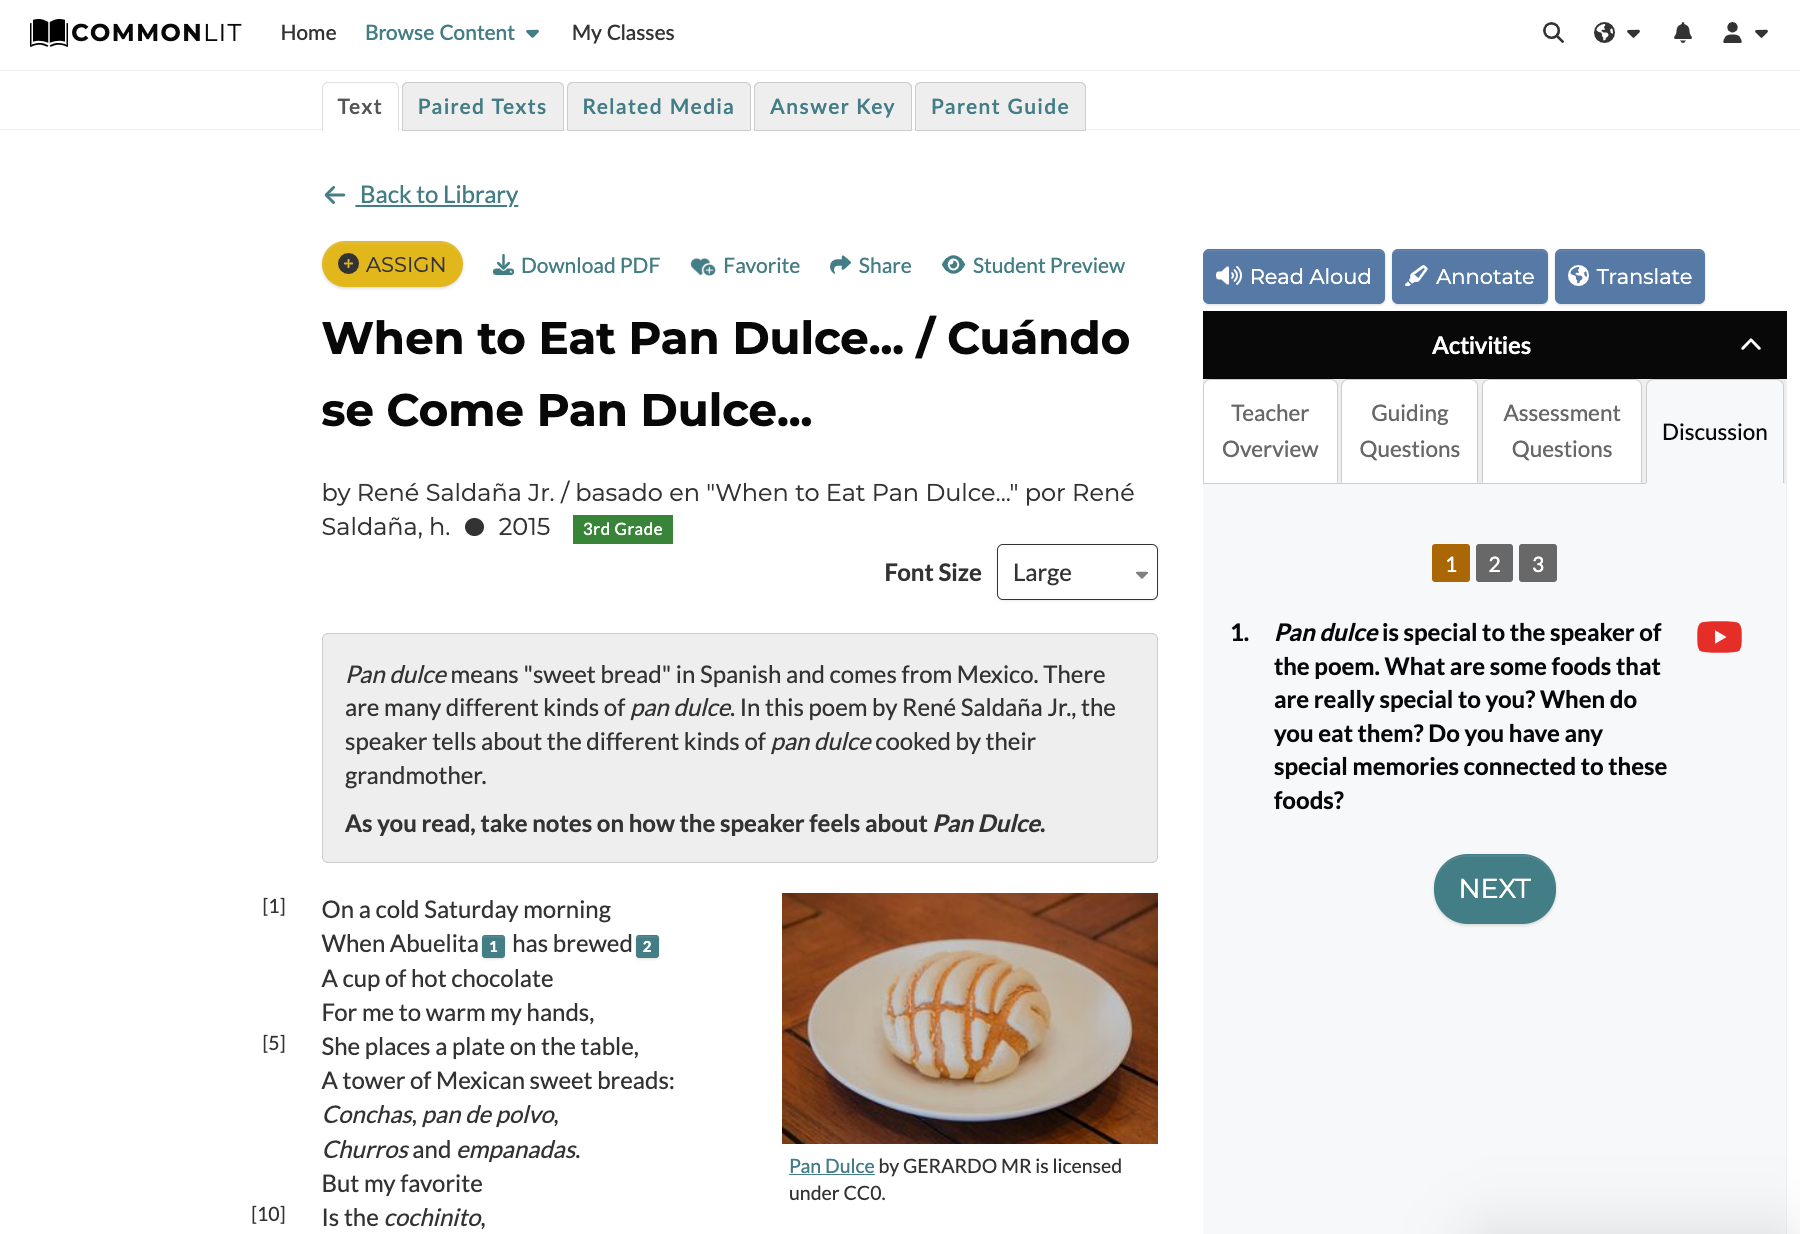 Screenshot of a CommonLit text called "When to Eat Pan Dulce.../Cuándo se Come Pan Dulce..." On the right side there is a discussion question, which is there to build reading comprehension skills for elementary students.